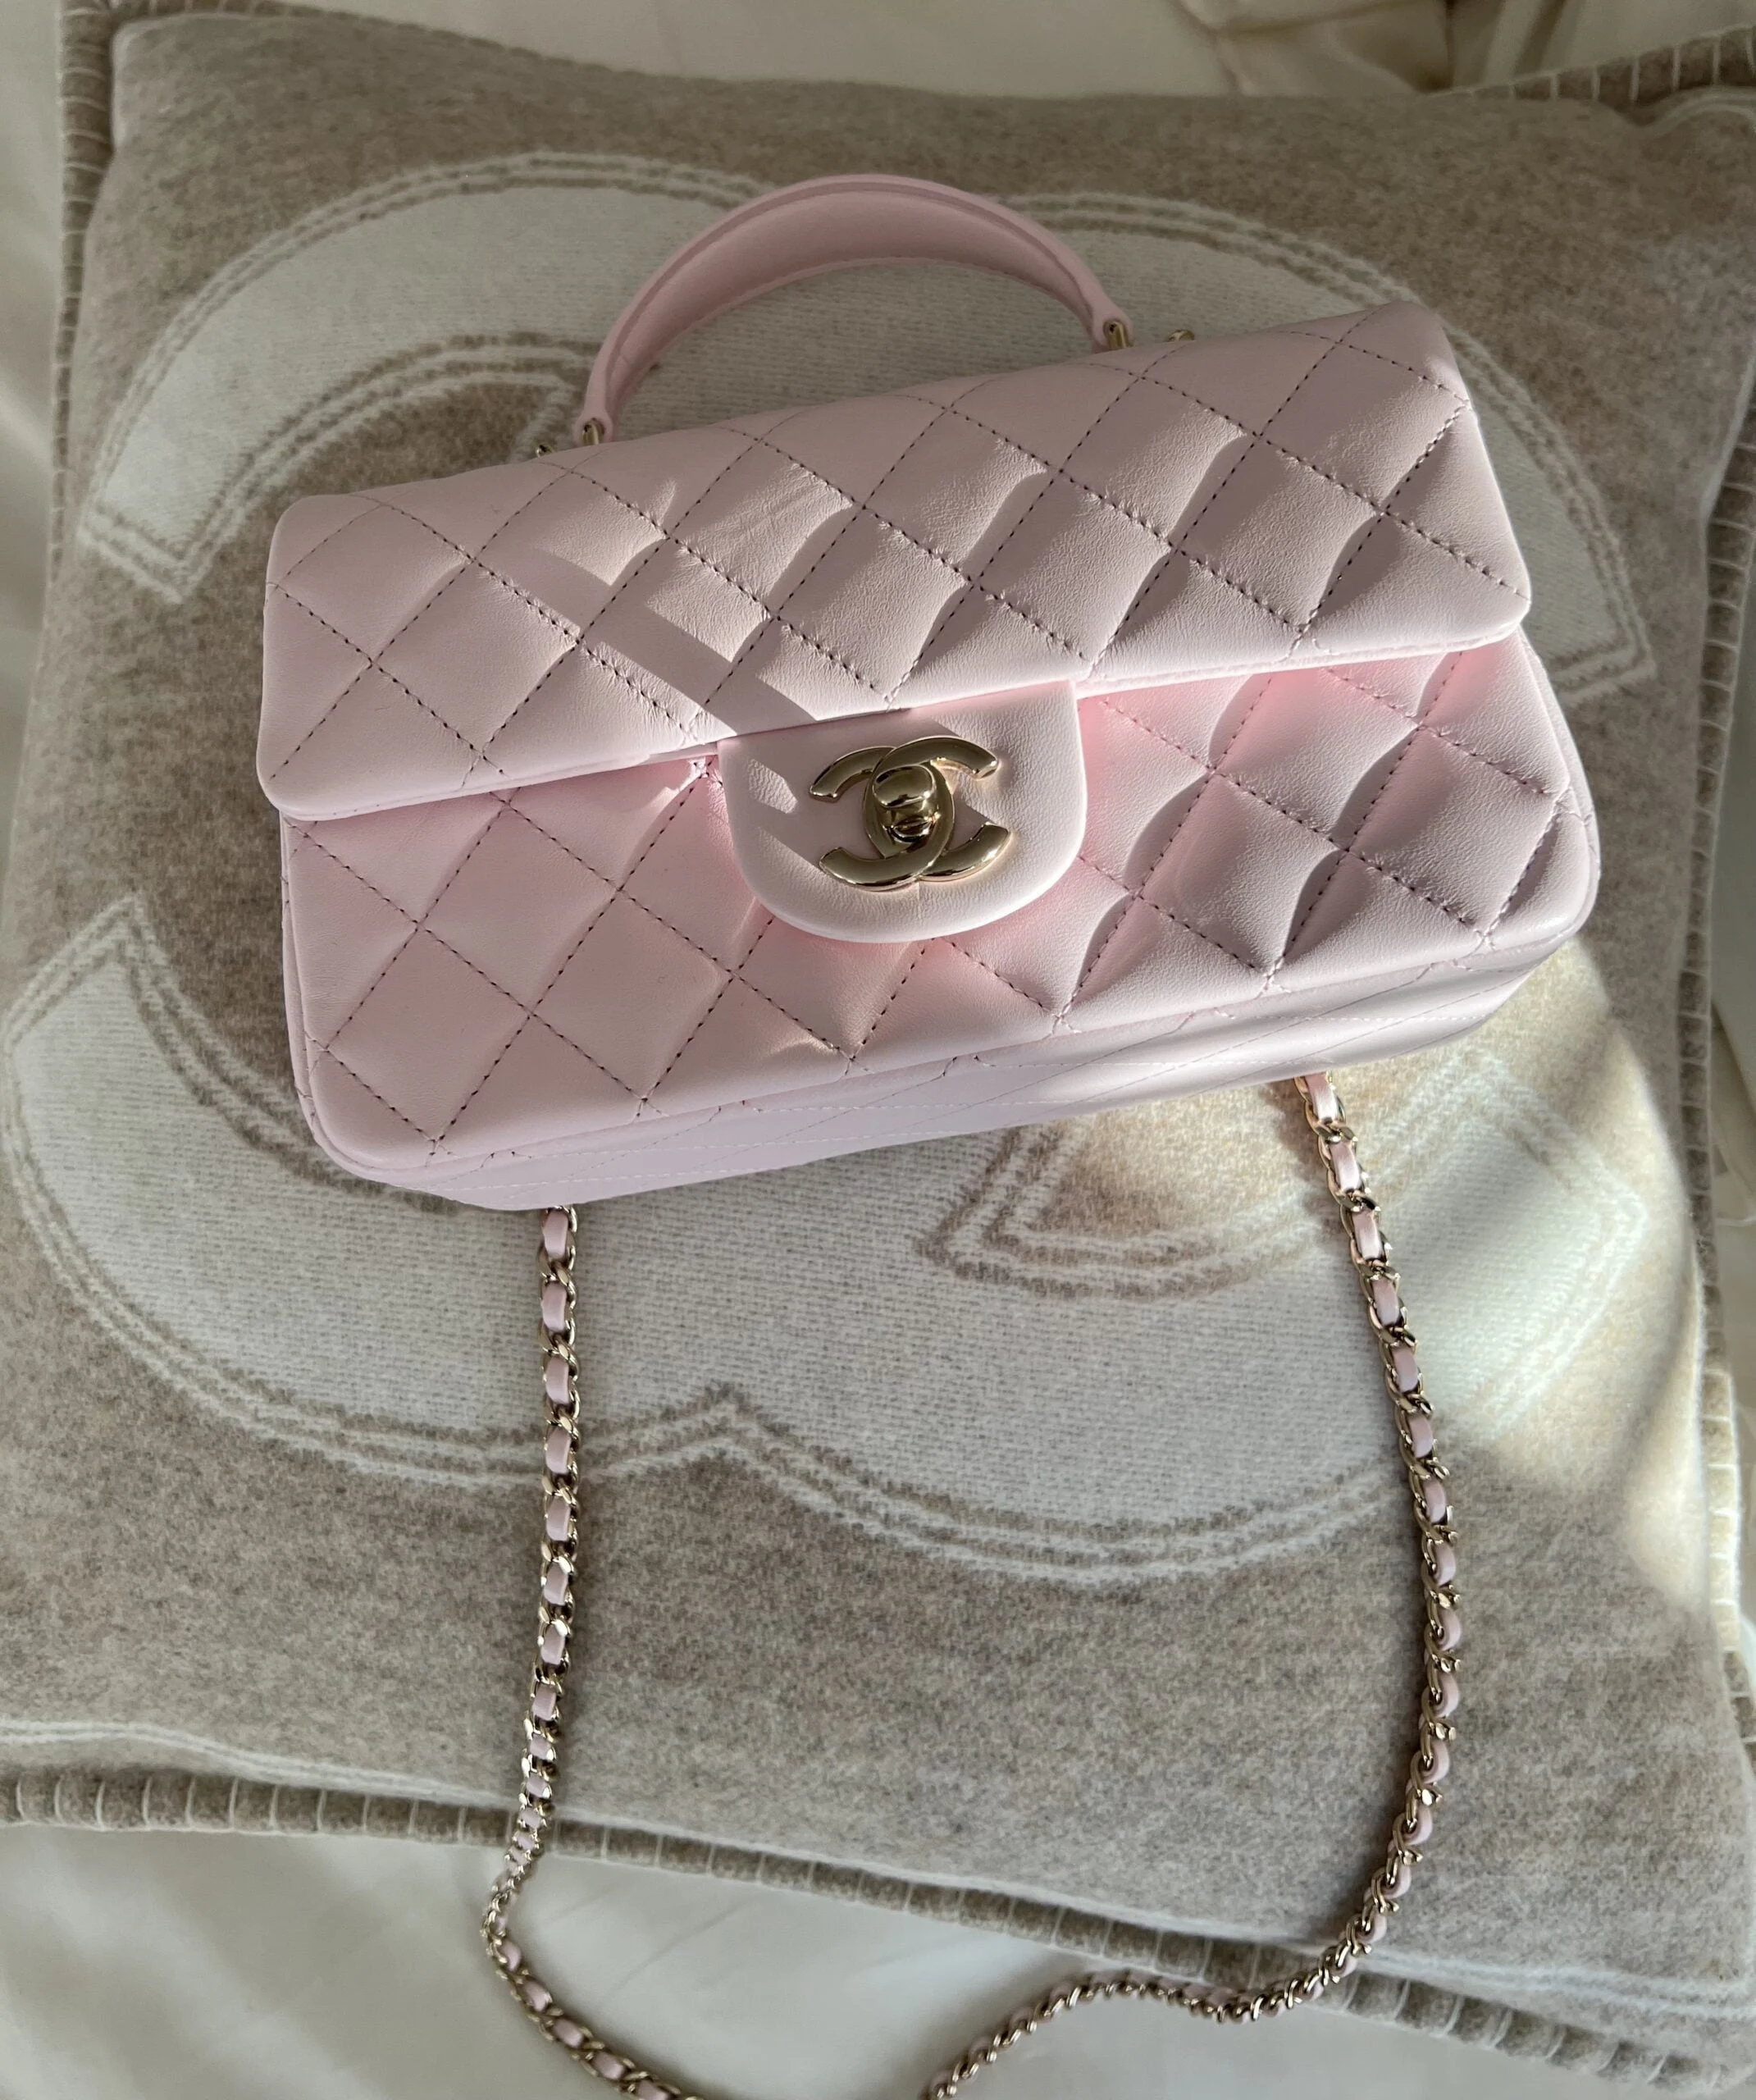 Buy Cheap Cheap Chanel AA+ bags #999934679 from